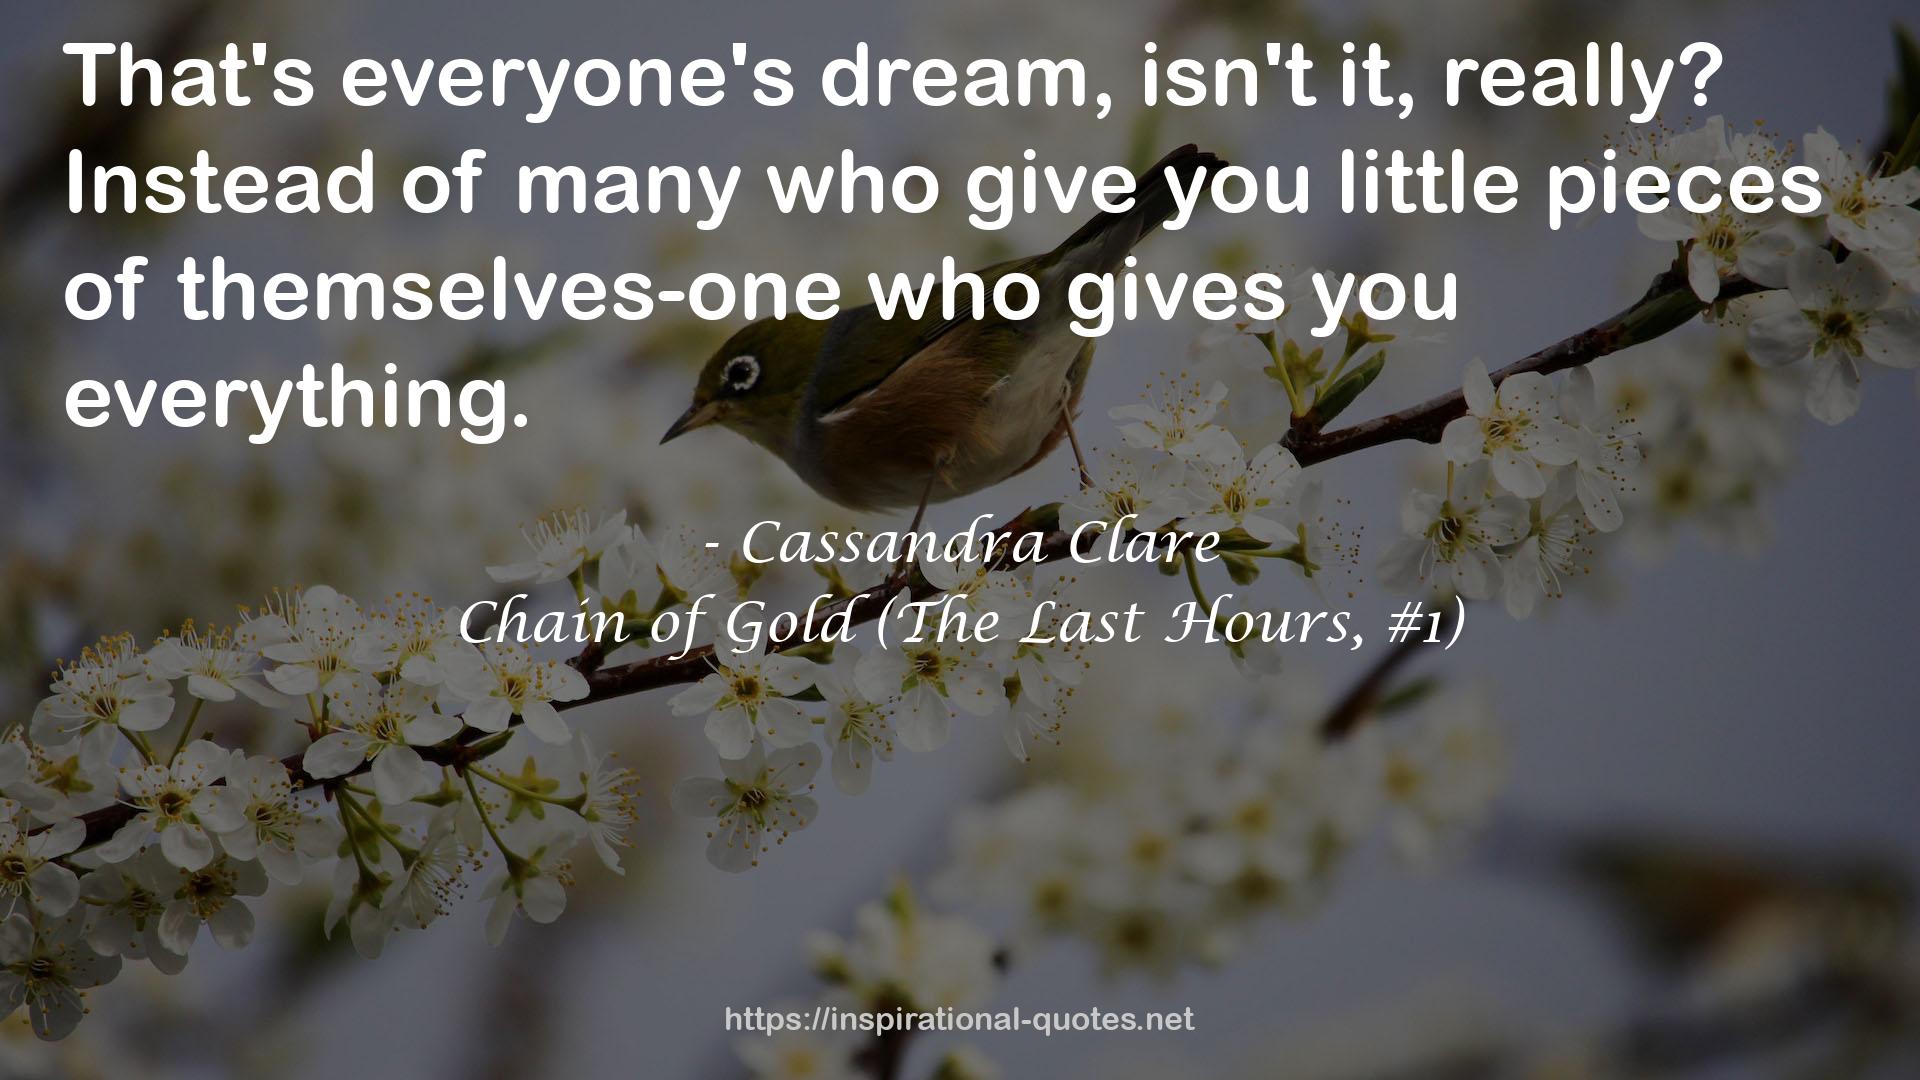 Chain of Gold (The Last Hours, #1) QUOTES